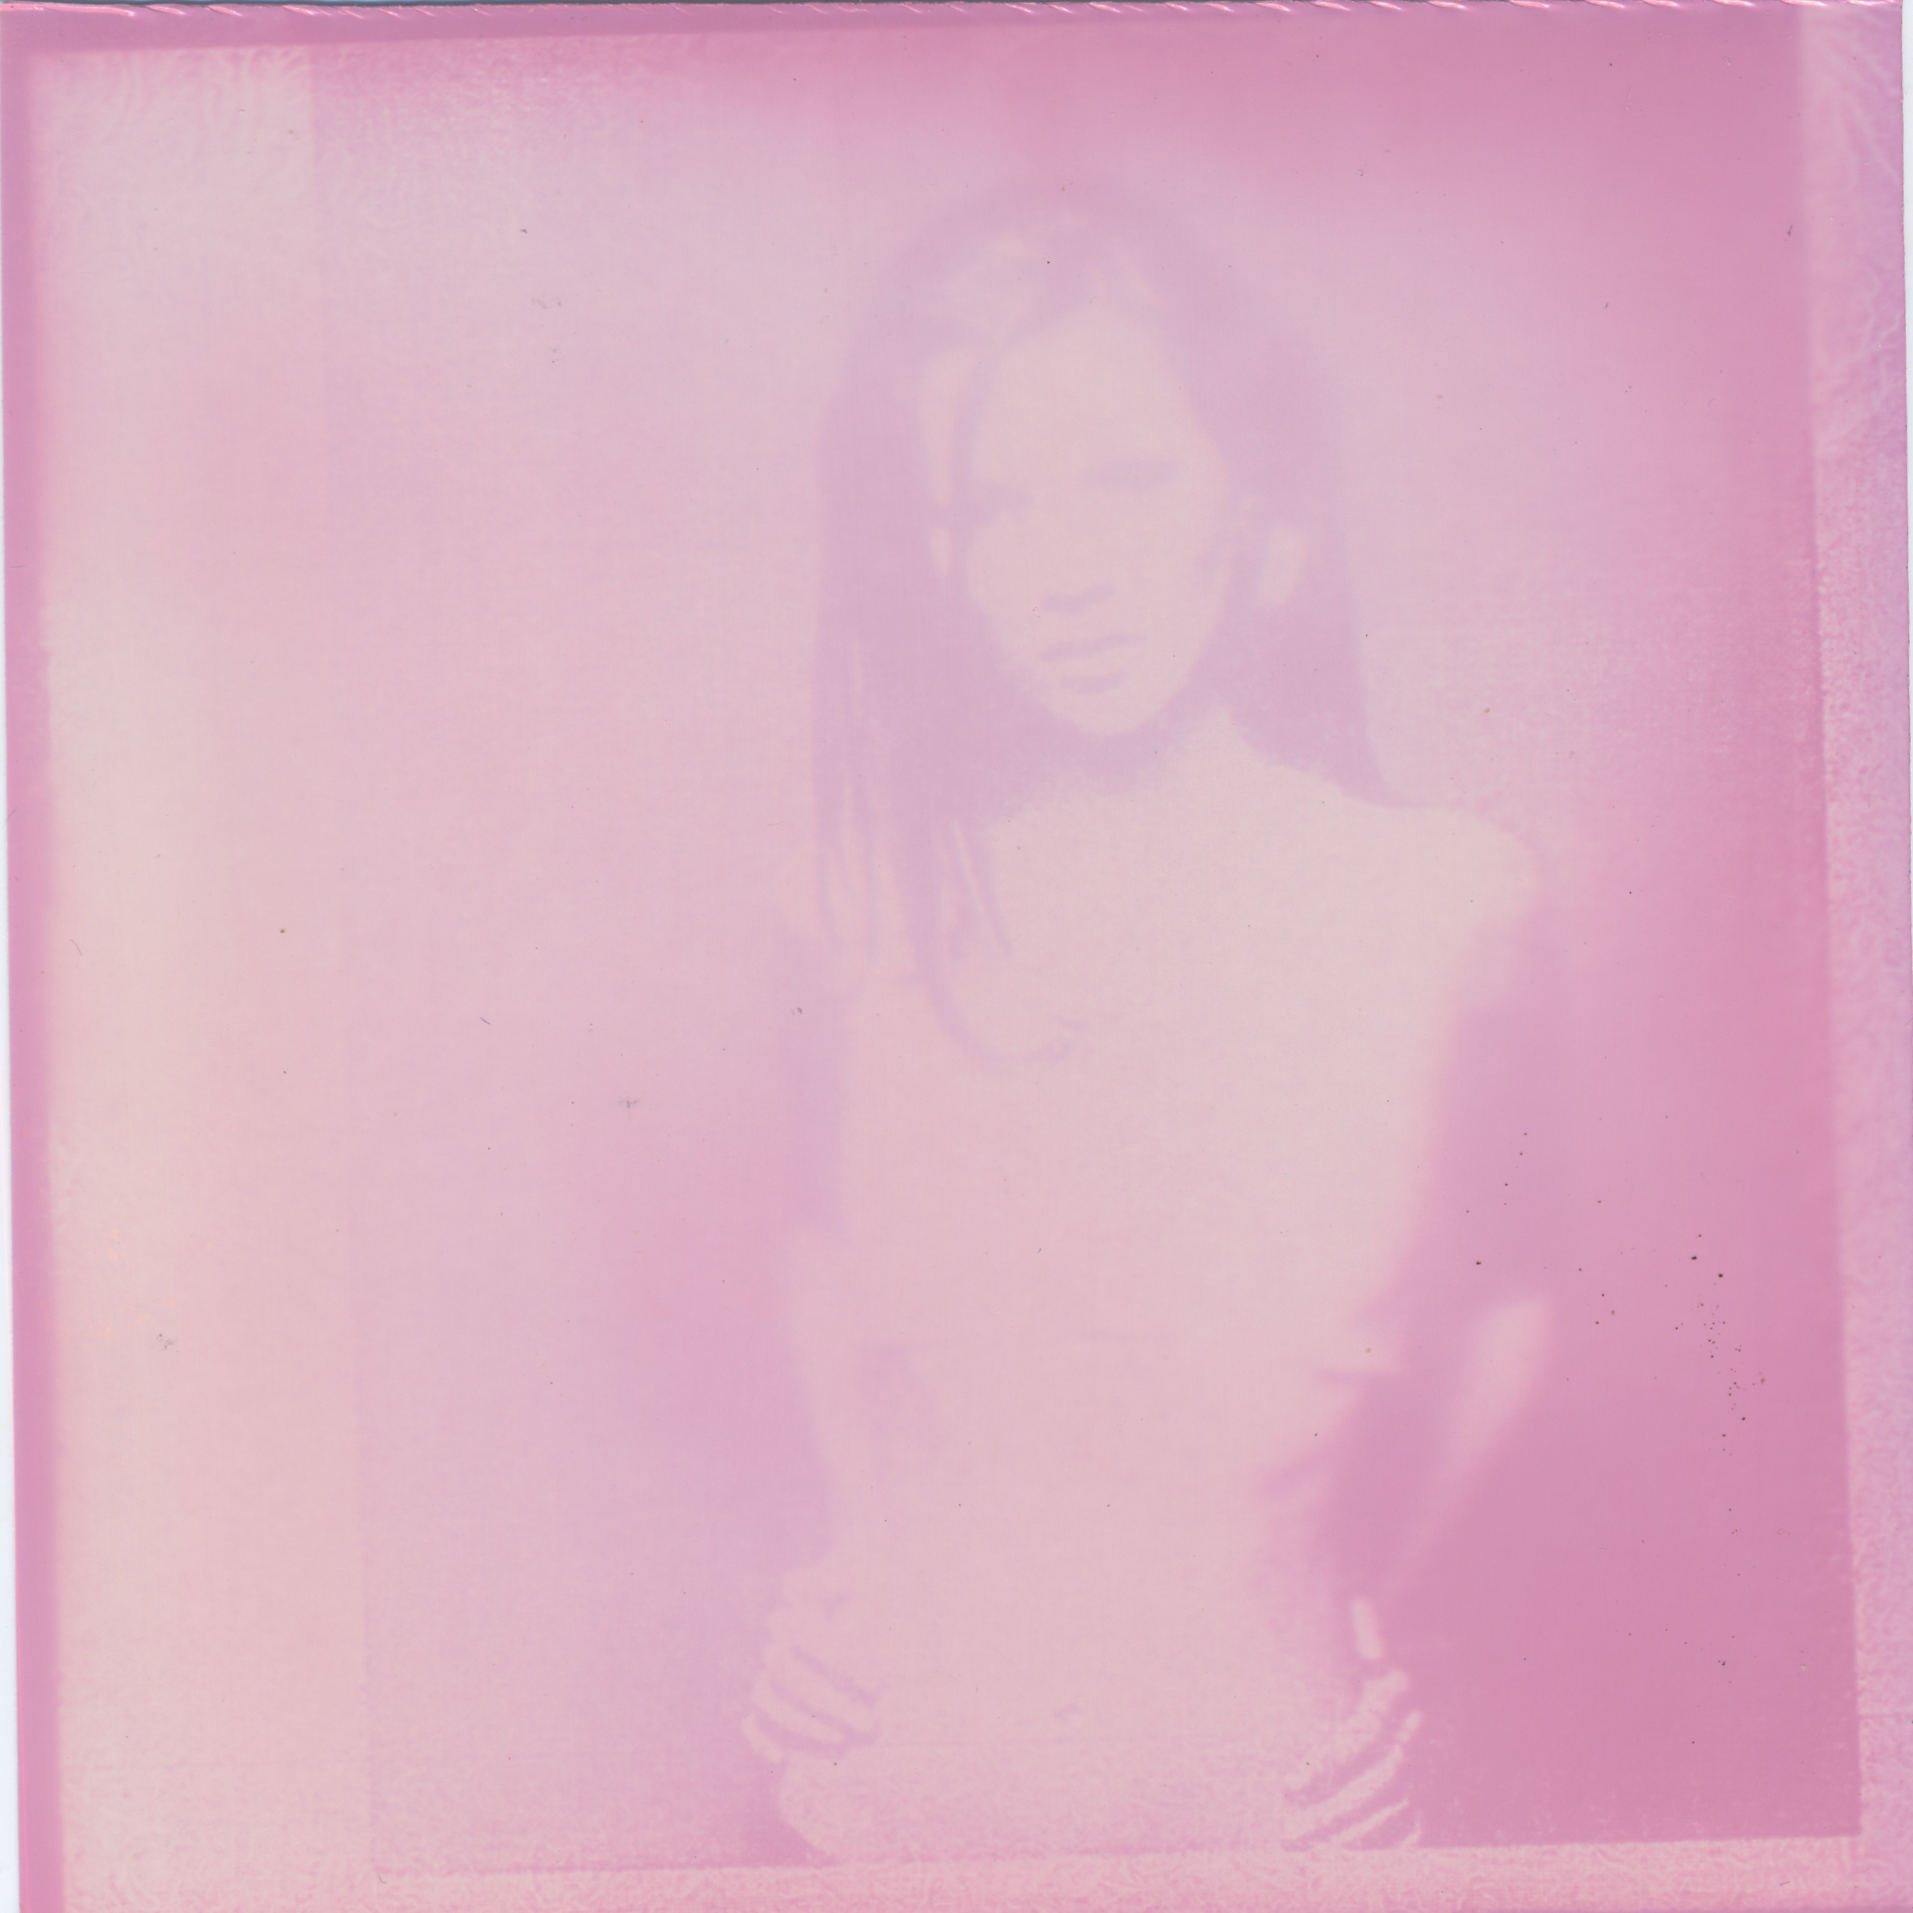   Lot 95 - SANTE d'ORAZIO (b.1956)&nbsp; Kate Moss, West Village, NYC, 1992 oversized chromogenic print signed in ink on copyright credit label, typed title, date and number '7/10' on label on backing board 50 x 40in. (127 x 101.6cm.)&nbsp;   A serie